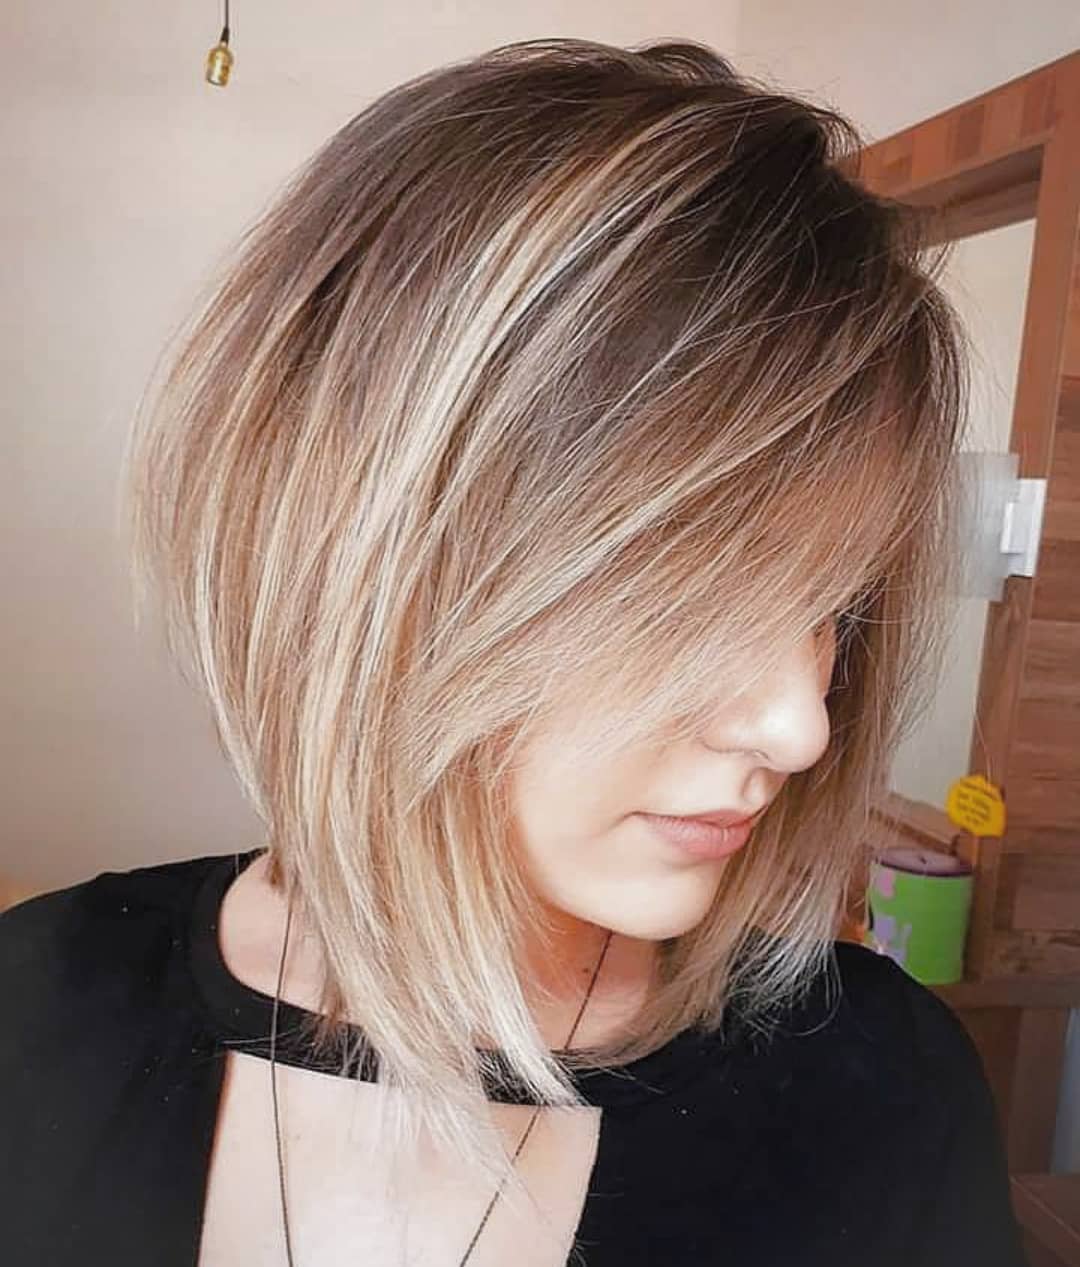 Layered Bob with a Side Bangs